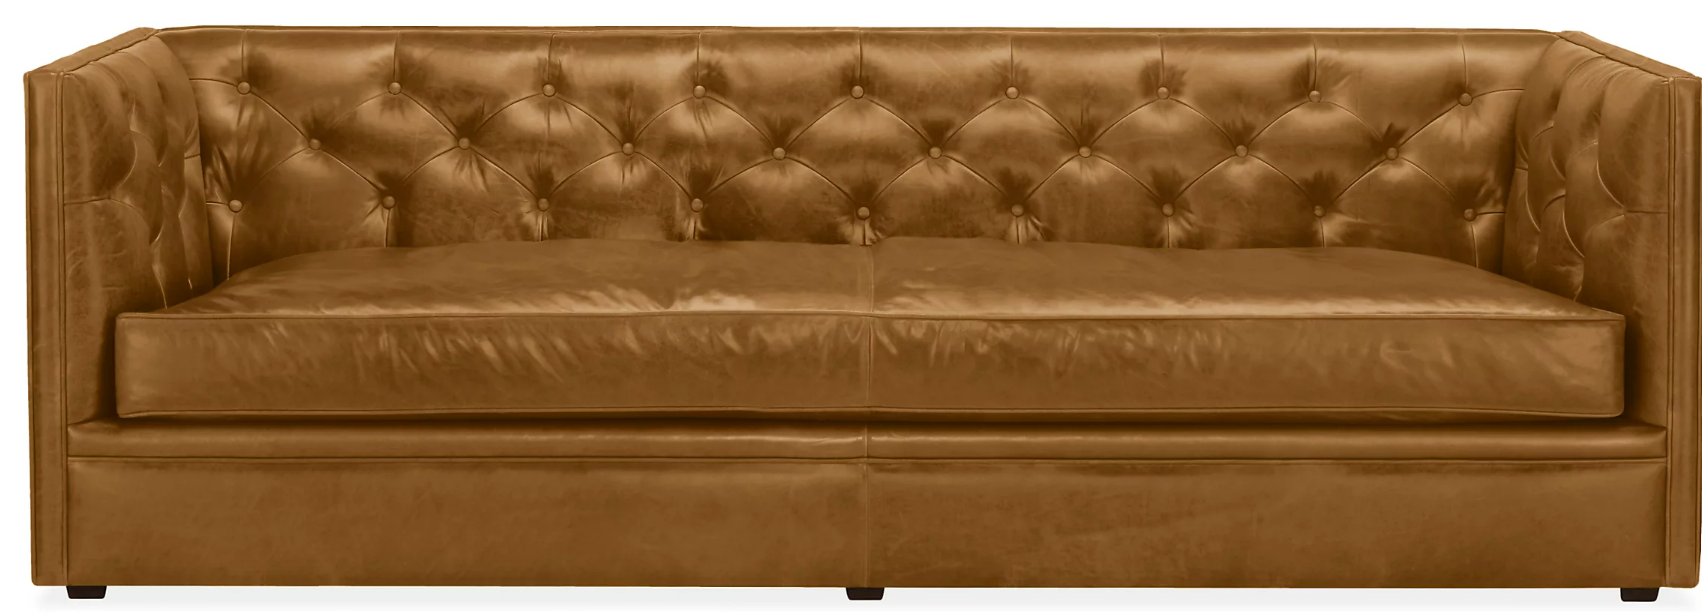 room-board-chesterfield